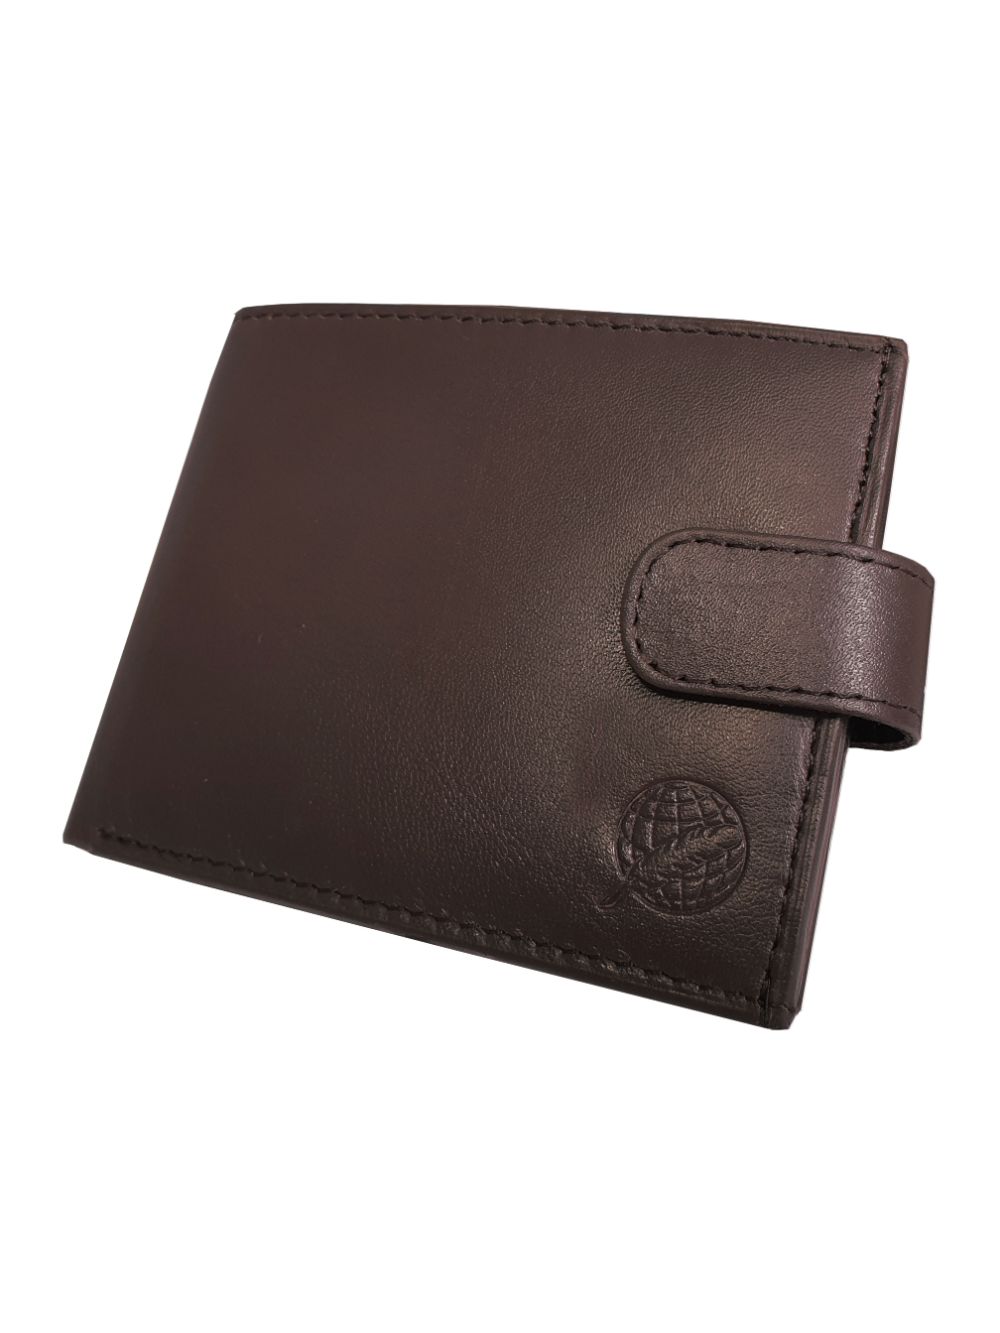 Designer Mens Wallet - Buttoned Coin Pouch - 9 Card Slots - RL374